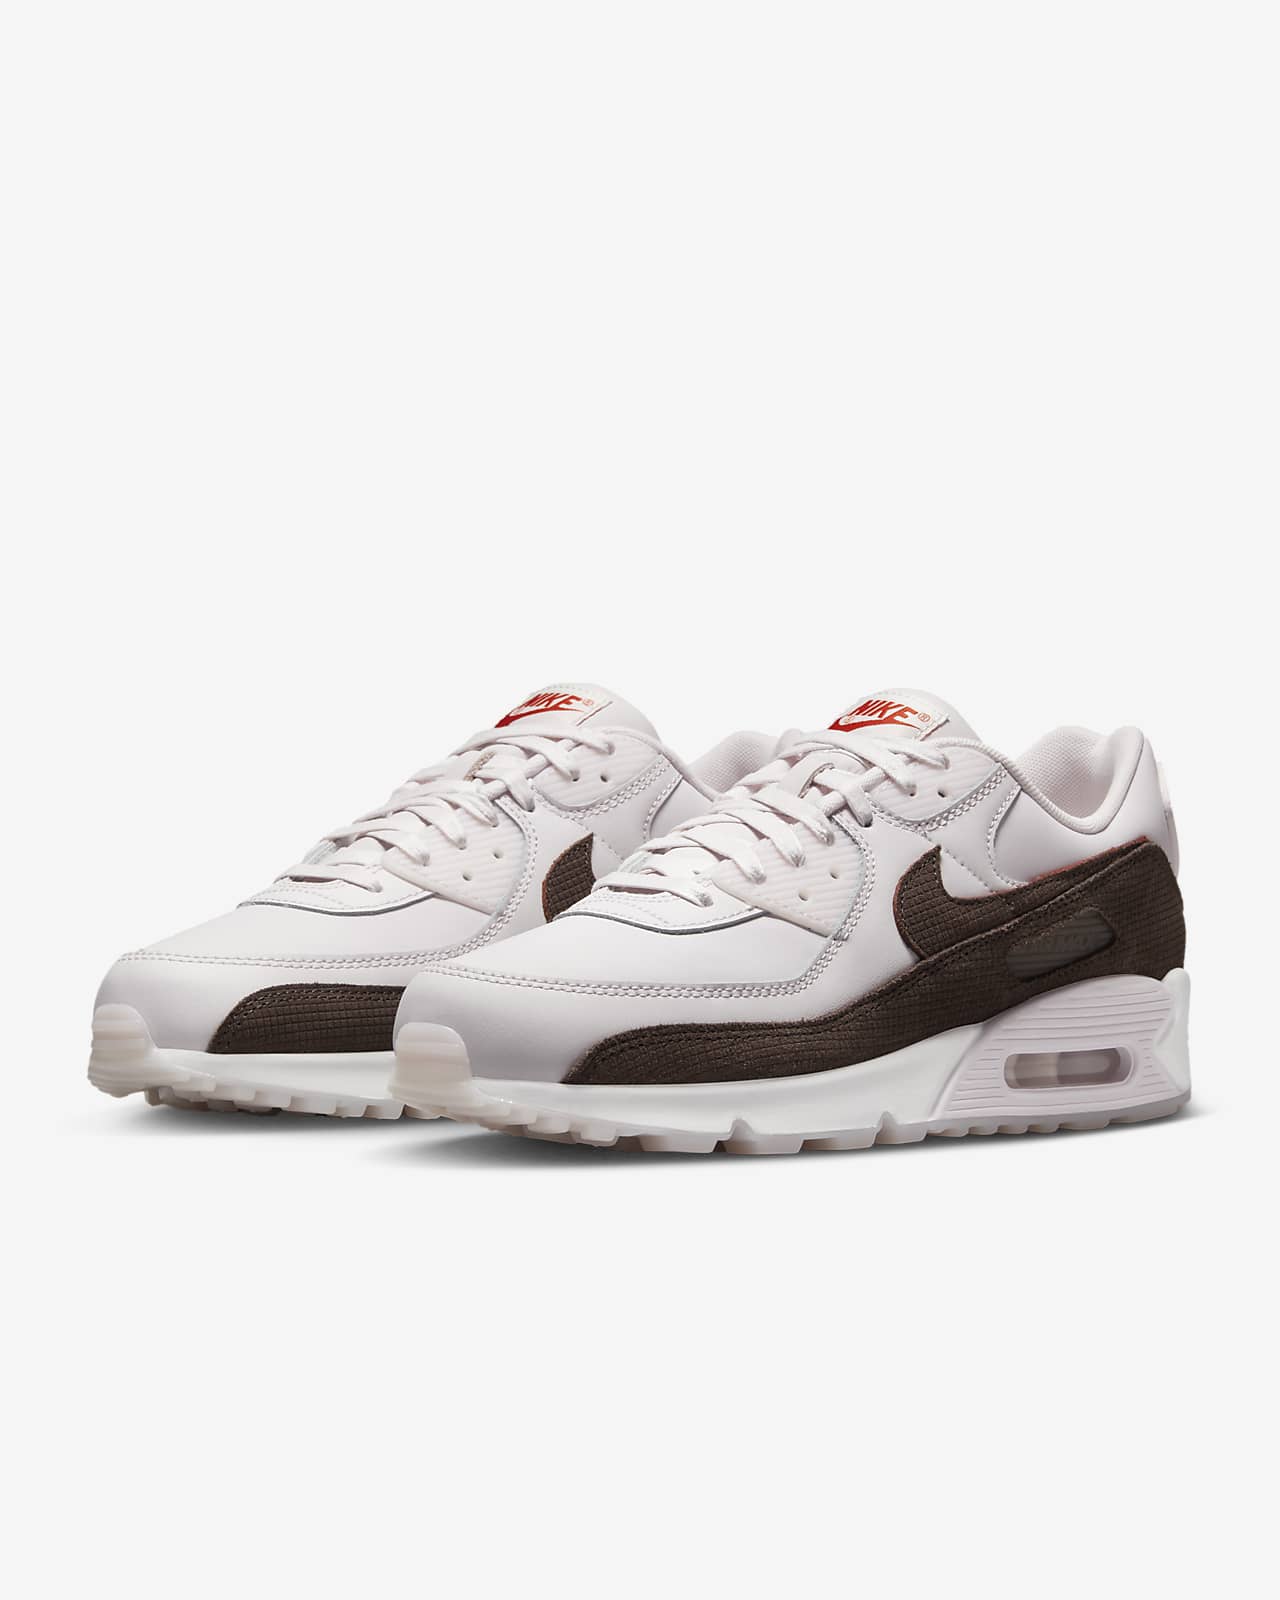 Nike Air Max 90 LTR Men's Shoes. ID